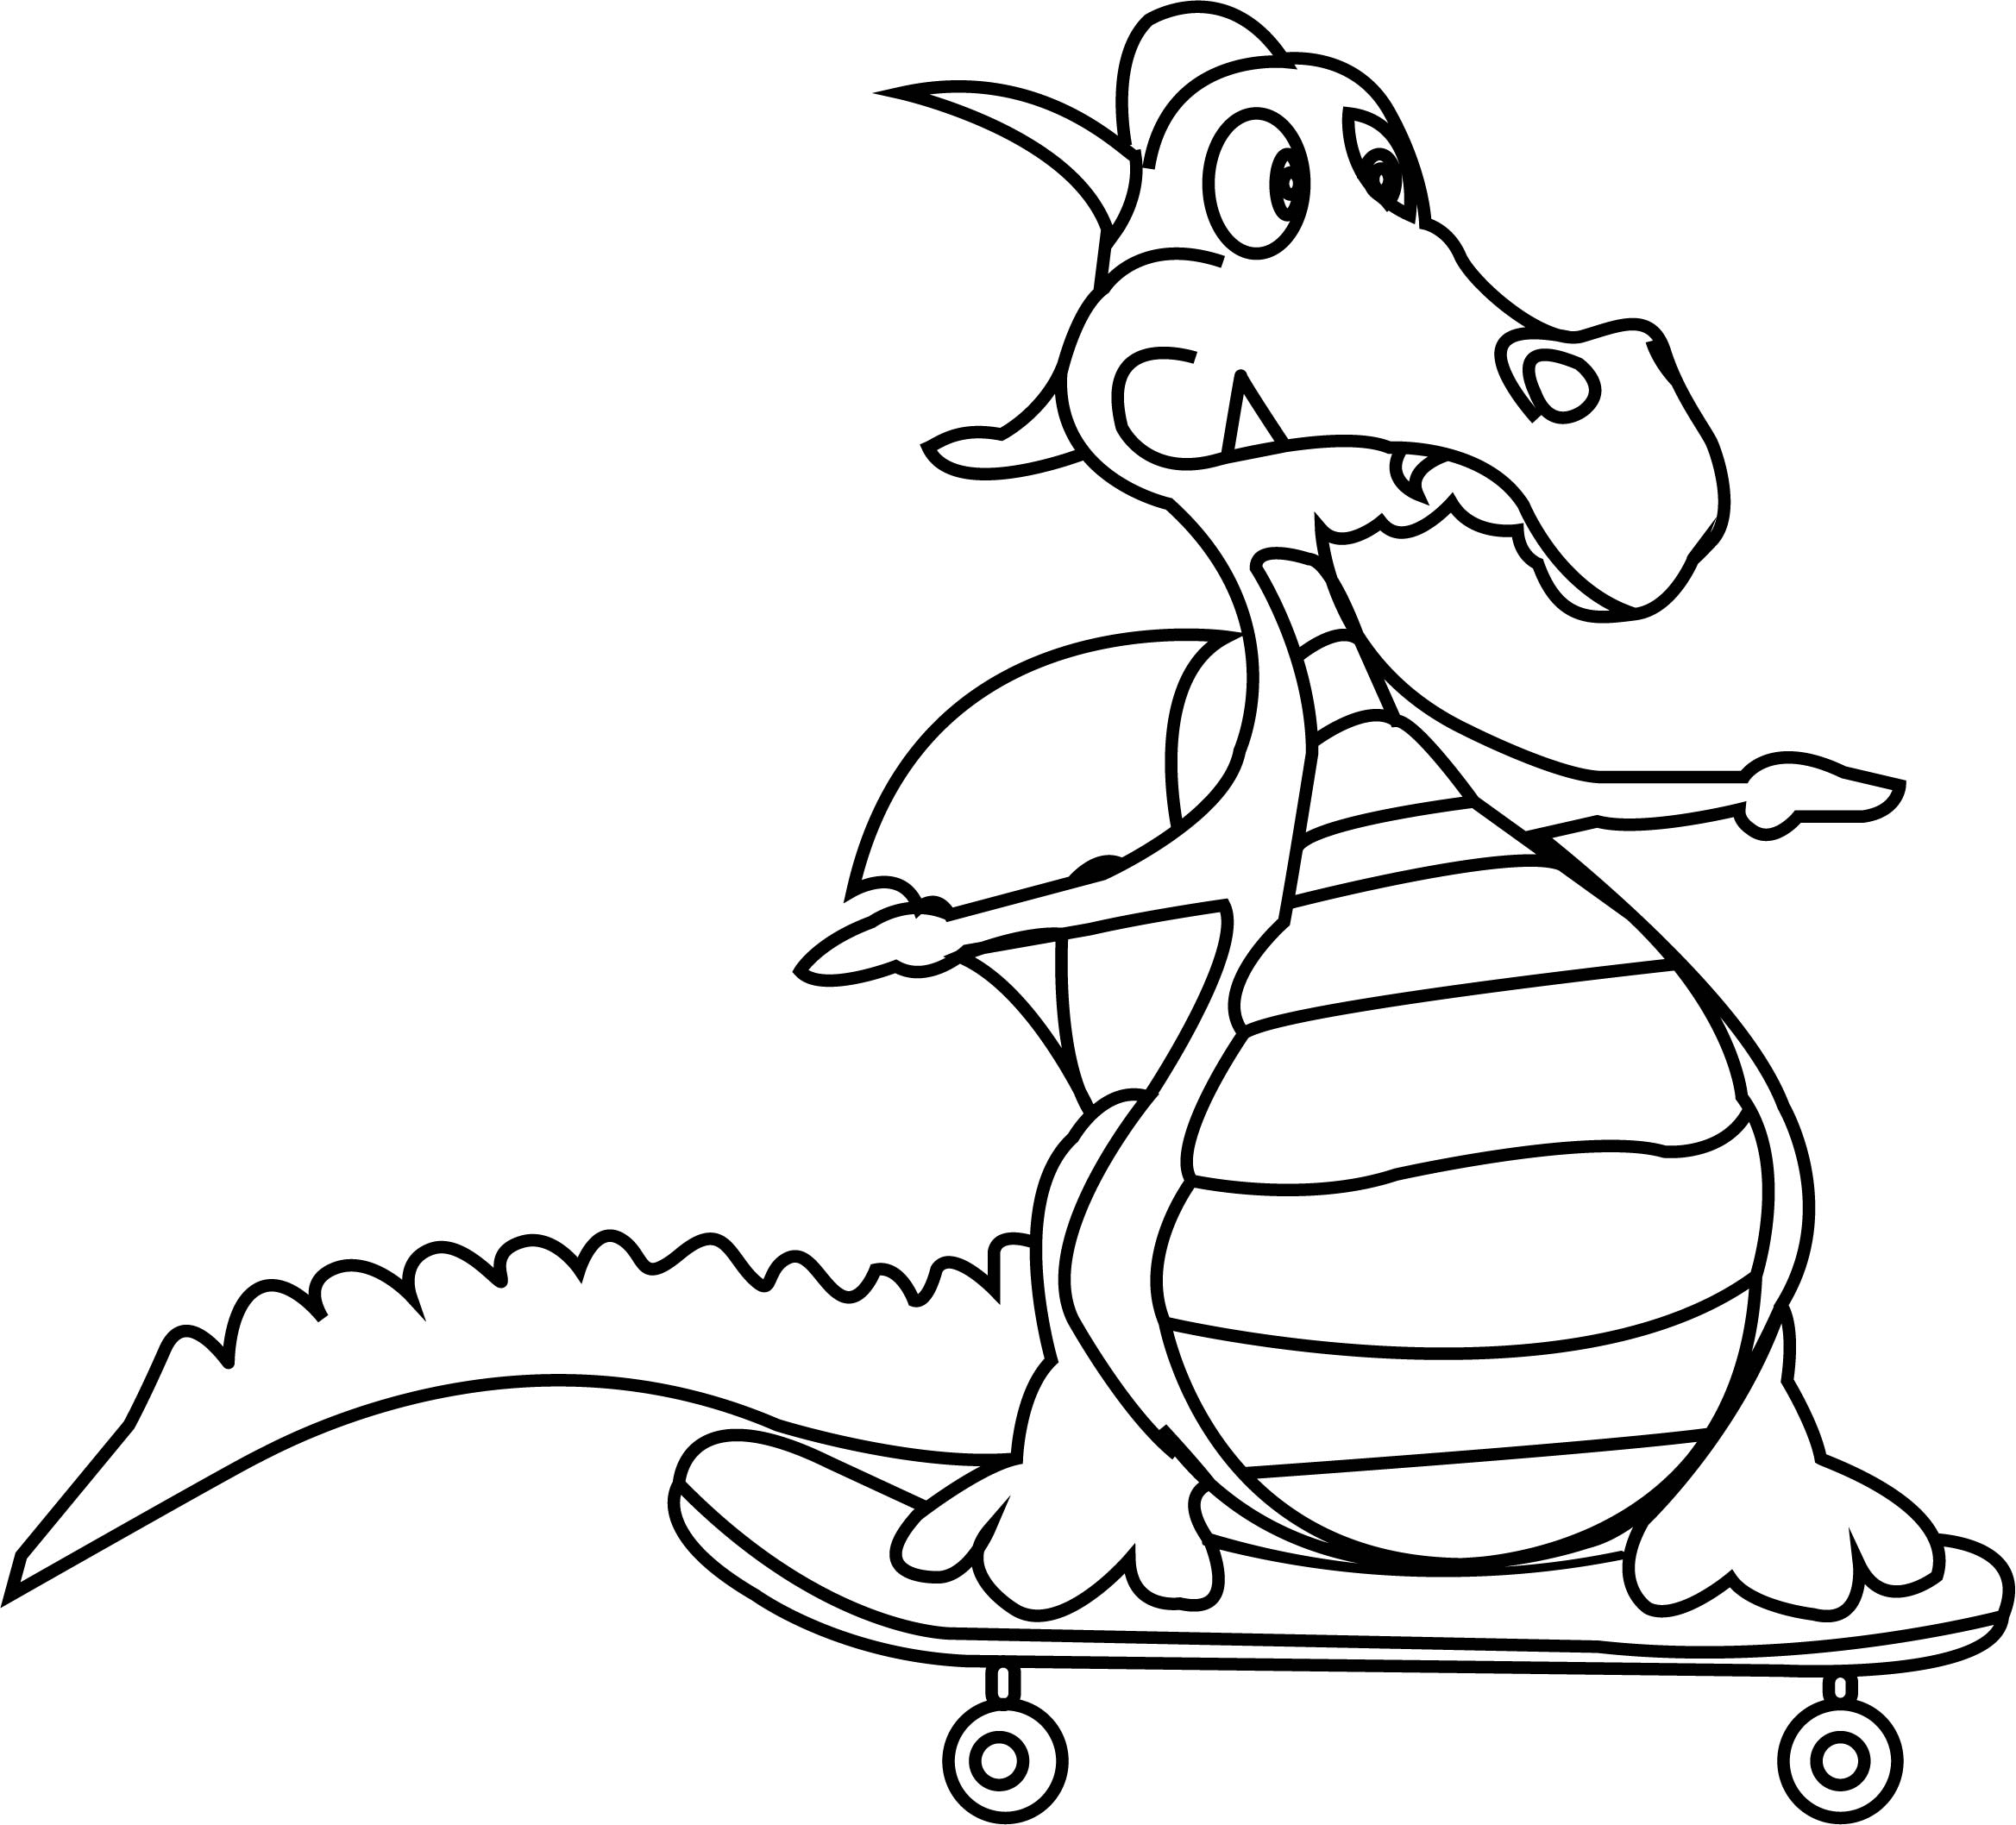  Funny Coloring Pages For Kids 6